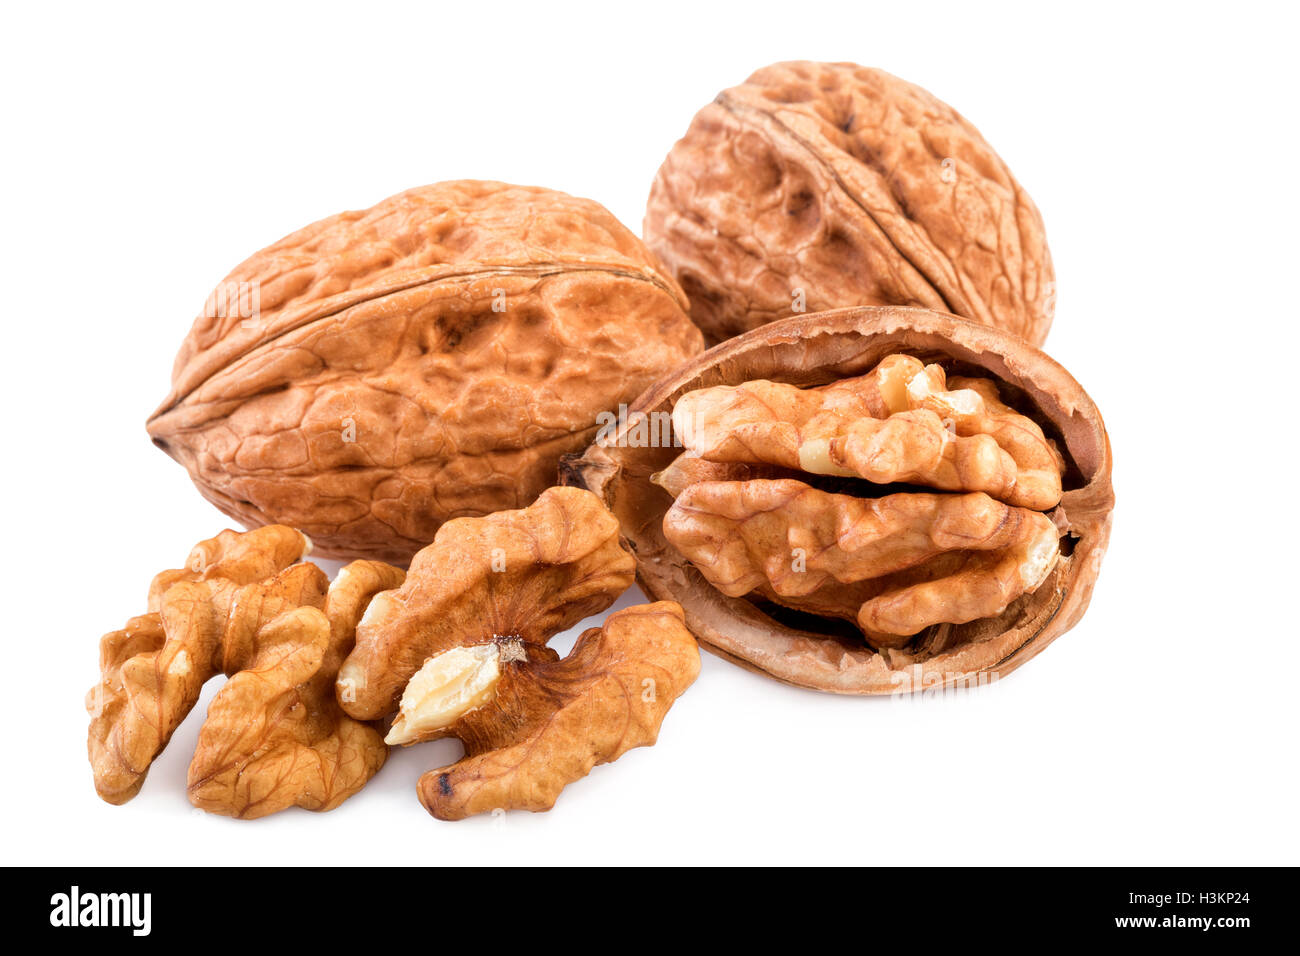 Nuts whole and shelled walnuts isolated on white background Stock Photo